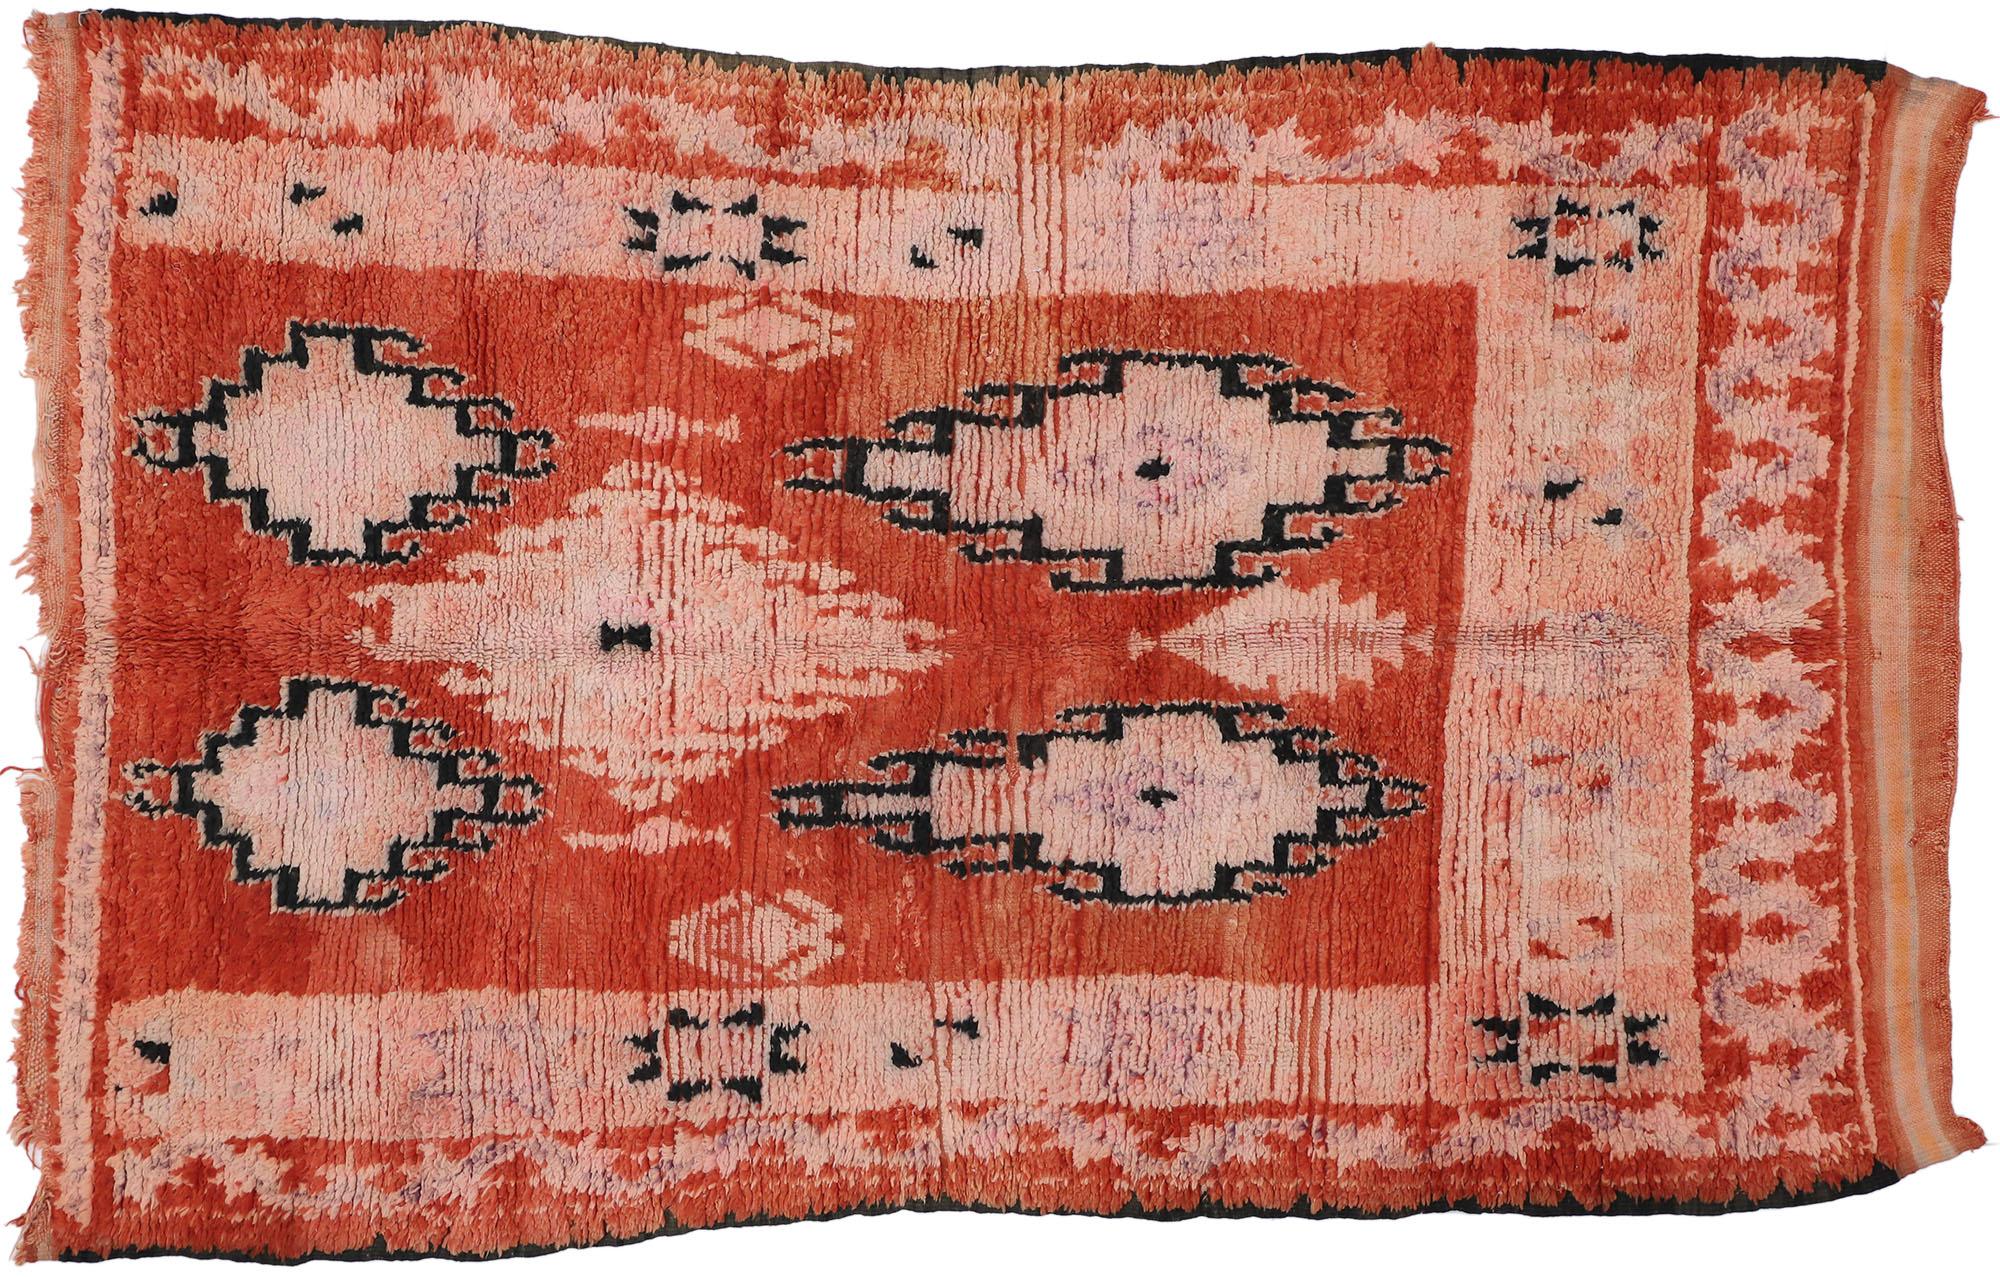 20777 Vintage Boujad Moroccan Rug, 05'04 x 08'06. Boujad rugs, originating from Morocco's Boujad region, are stunning handwoven creations showcasing the vibrant artistic traditions of Berber tribes, notably the Haouz and Rehamna. These rugs explode